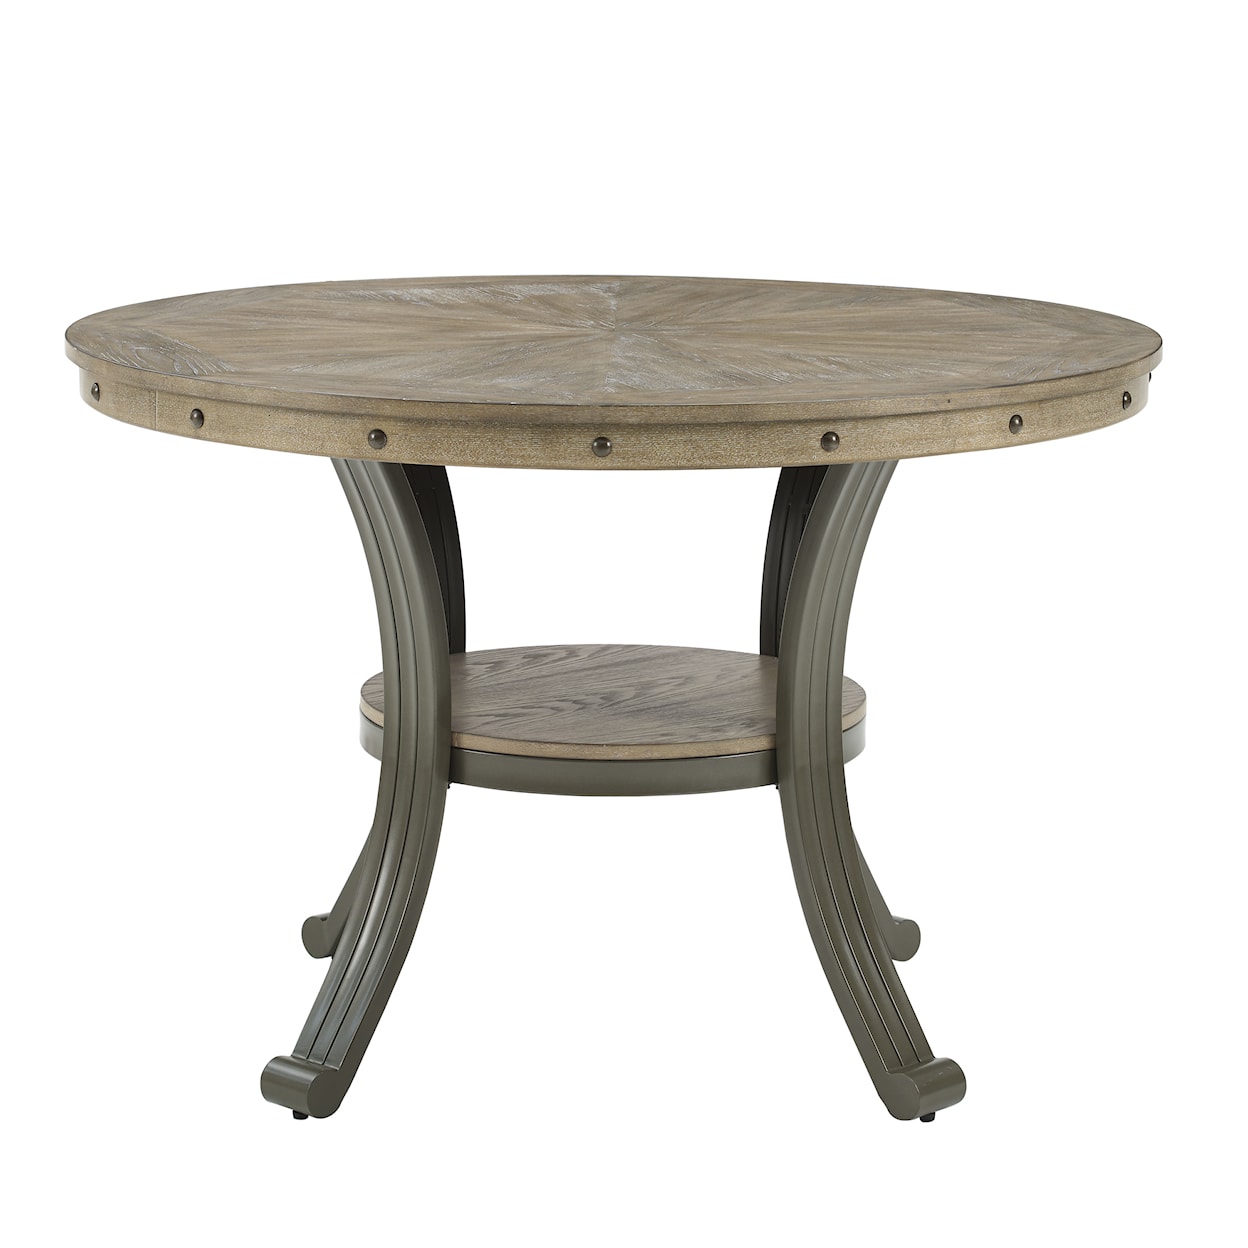 Powell Franklin 45 inch Round Dining Table